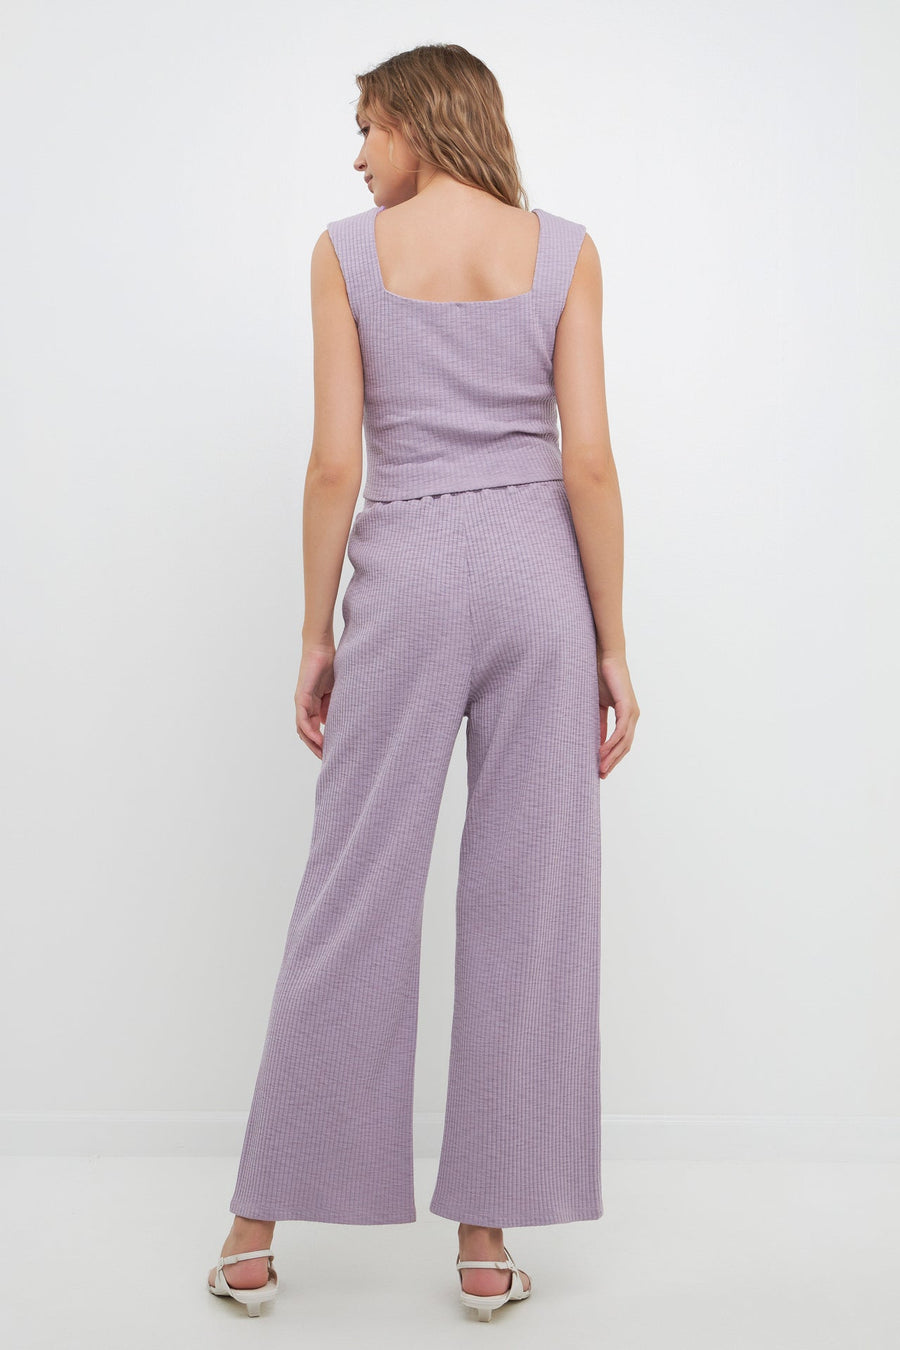 FREE THE ROSES-Loungewear Pants-PANTS available at Objectrare